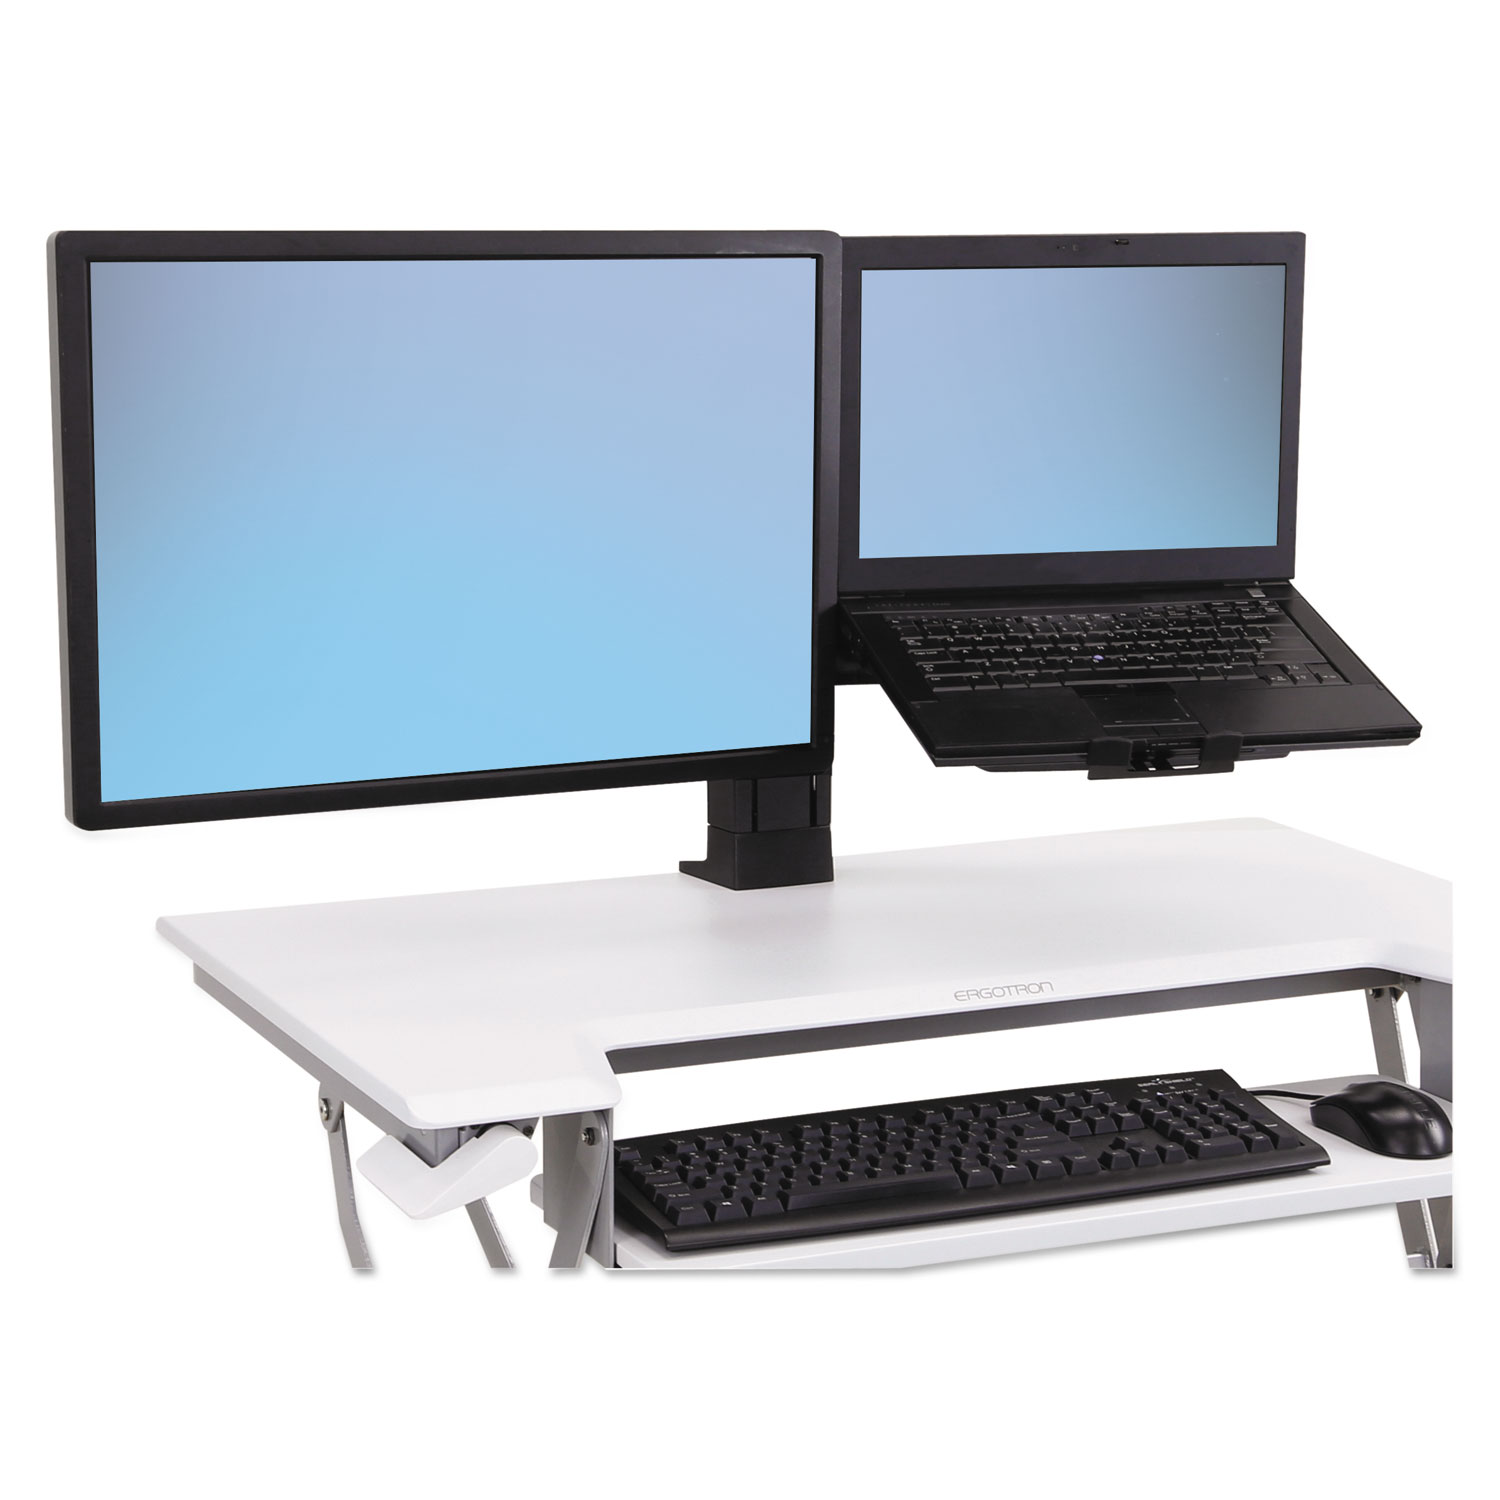  WorkFit by Ergotron 97-907 WorkFit-T and WorkFit-PD Conversion Kit, LCD and Laptop Kit, 30.5w x 5.75d x 17.38h, Black (ERG97907) 